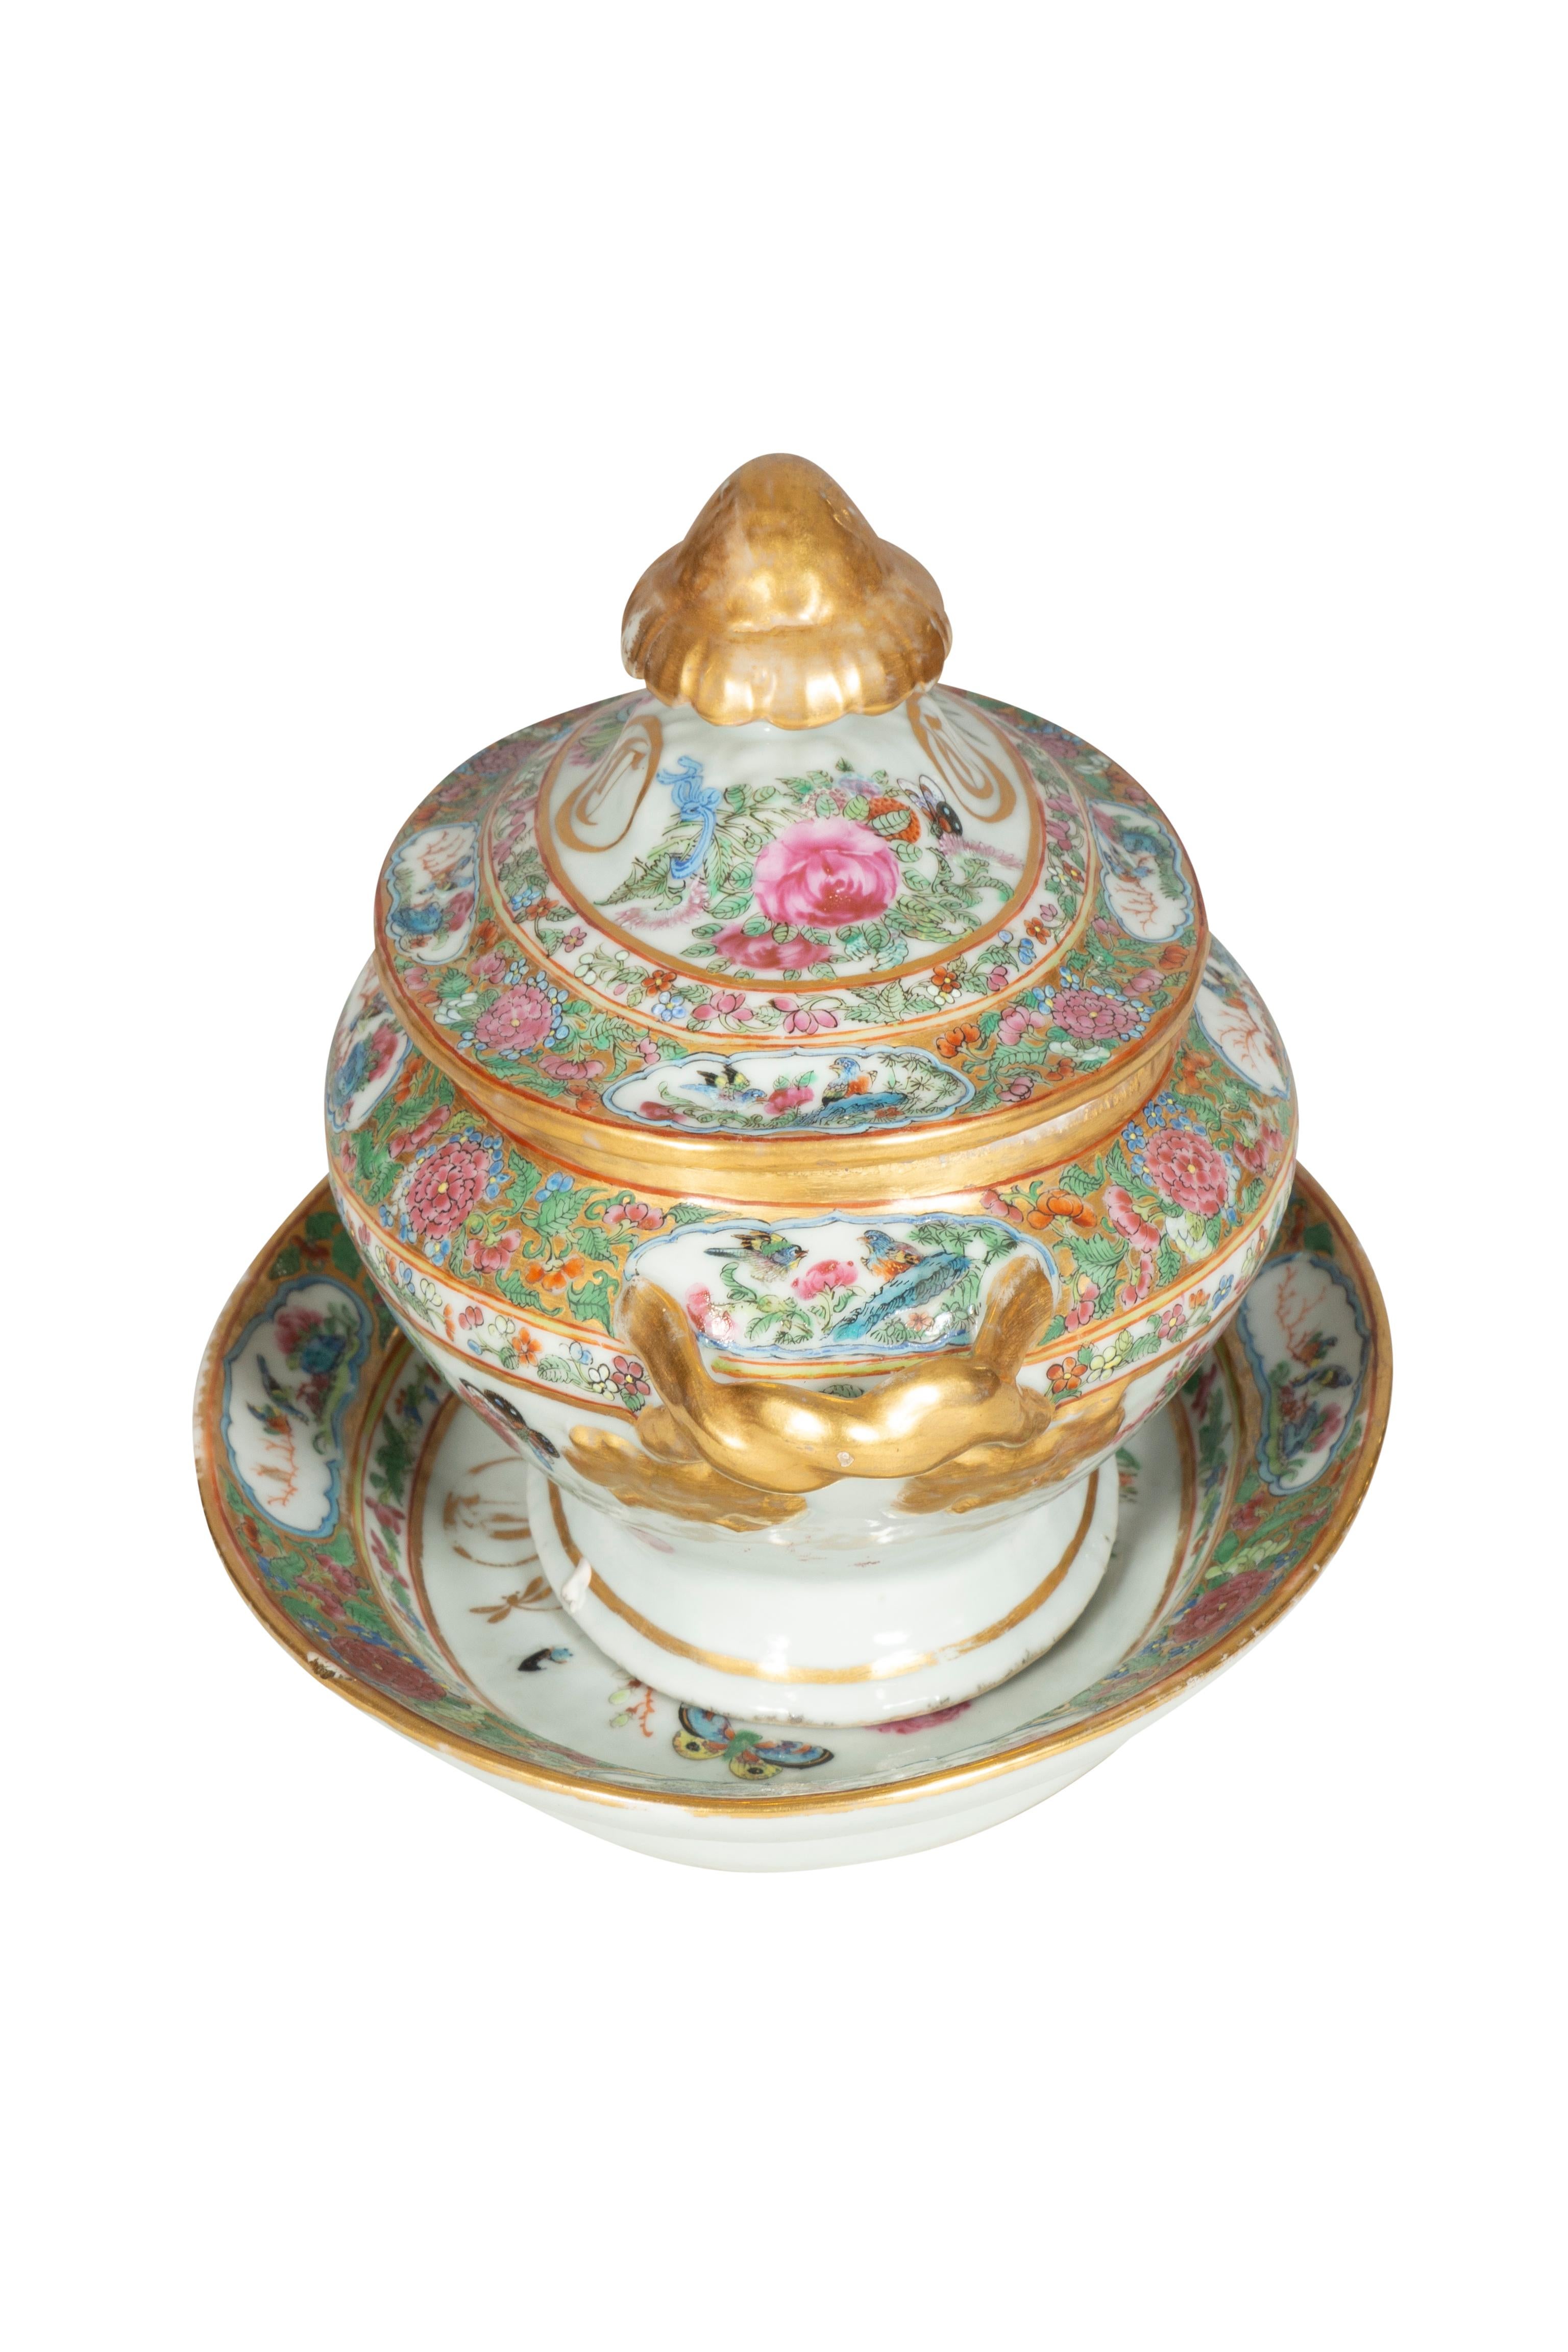 Chinese Export Famille Rose Porcelain Sauce Tureen And Underplate In Good Condition For Sale In Essex, MA